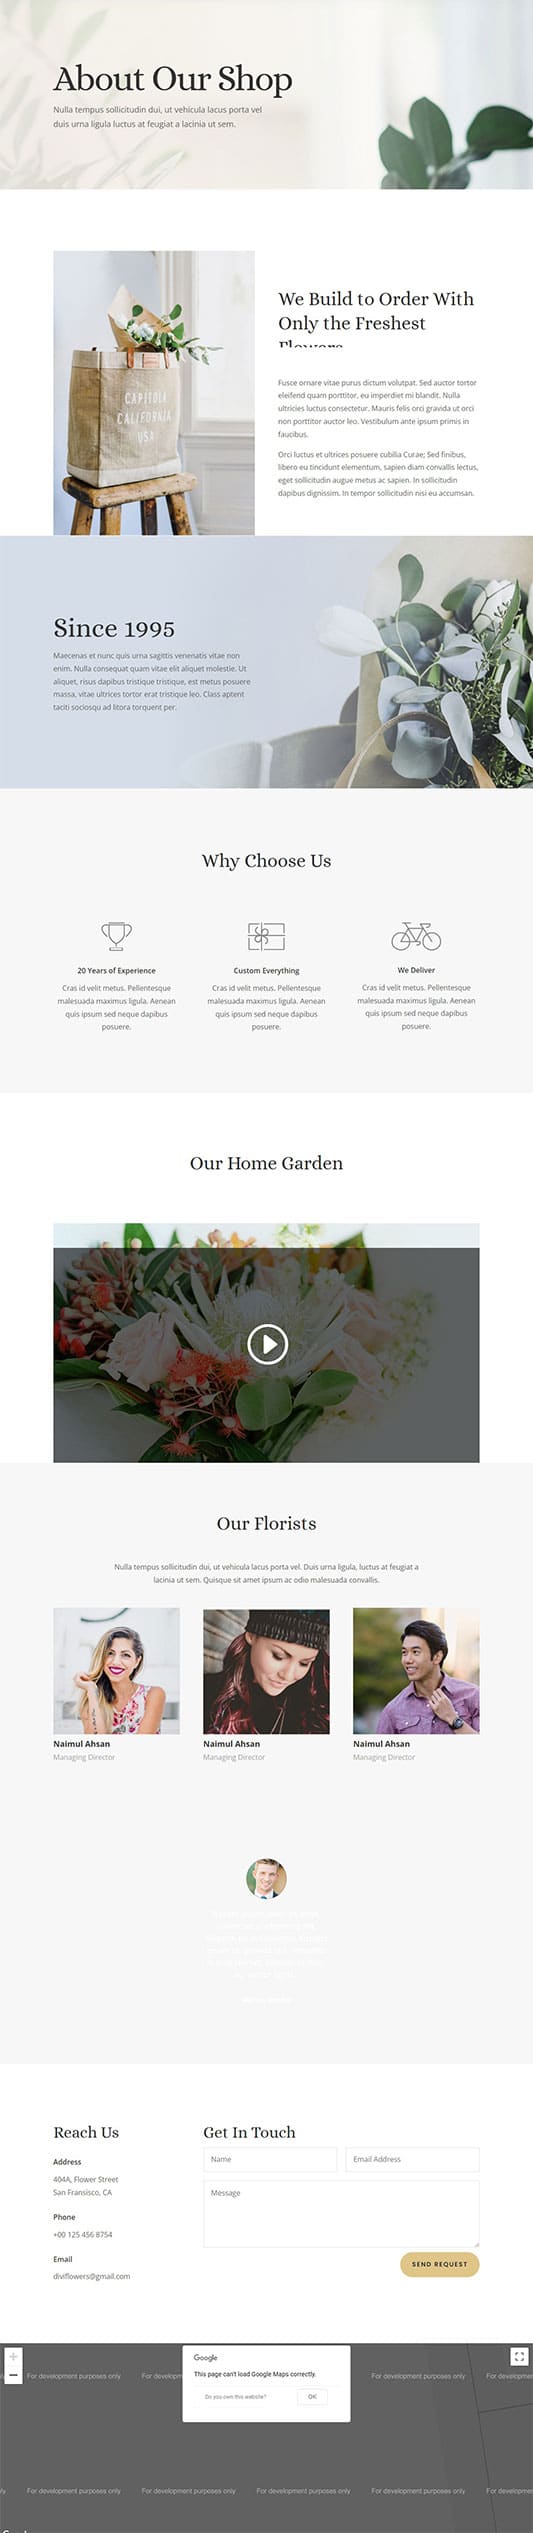 Florist About Page